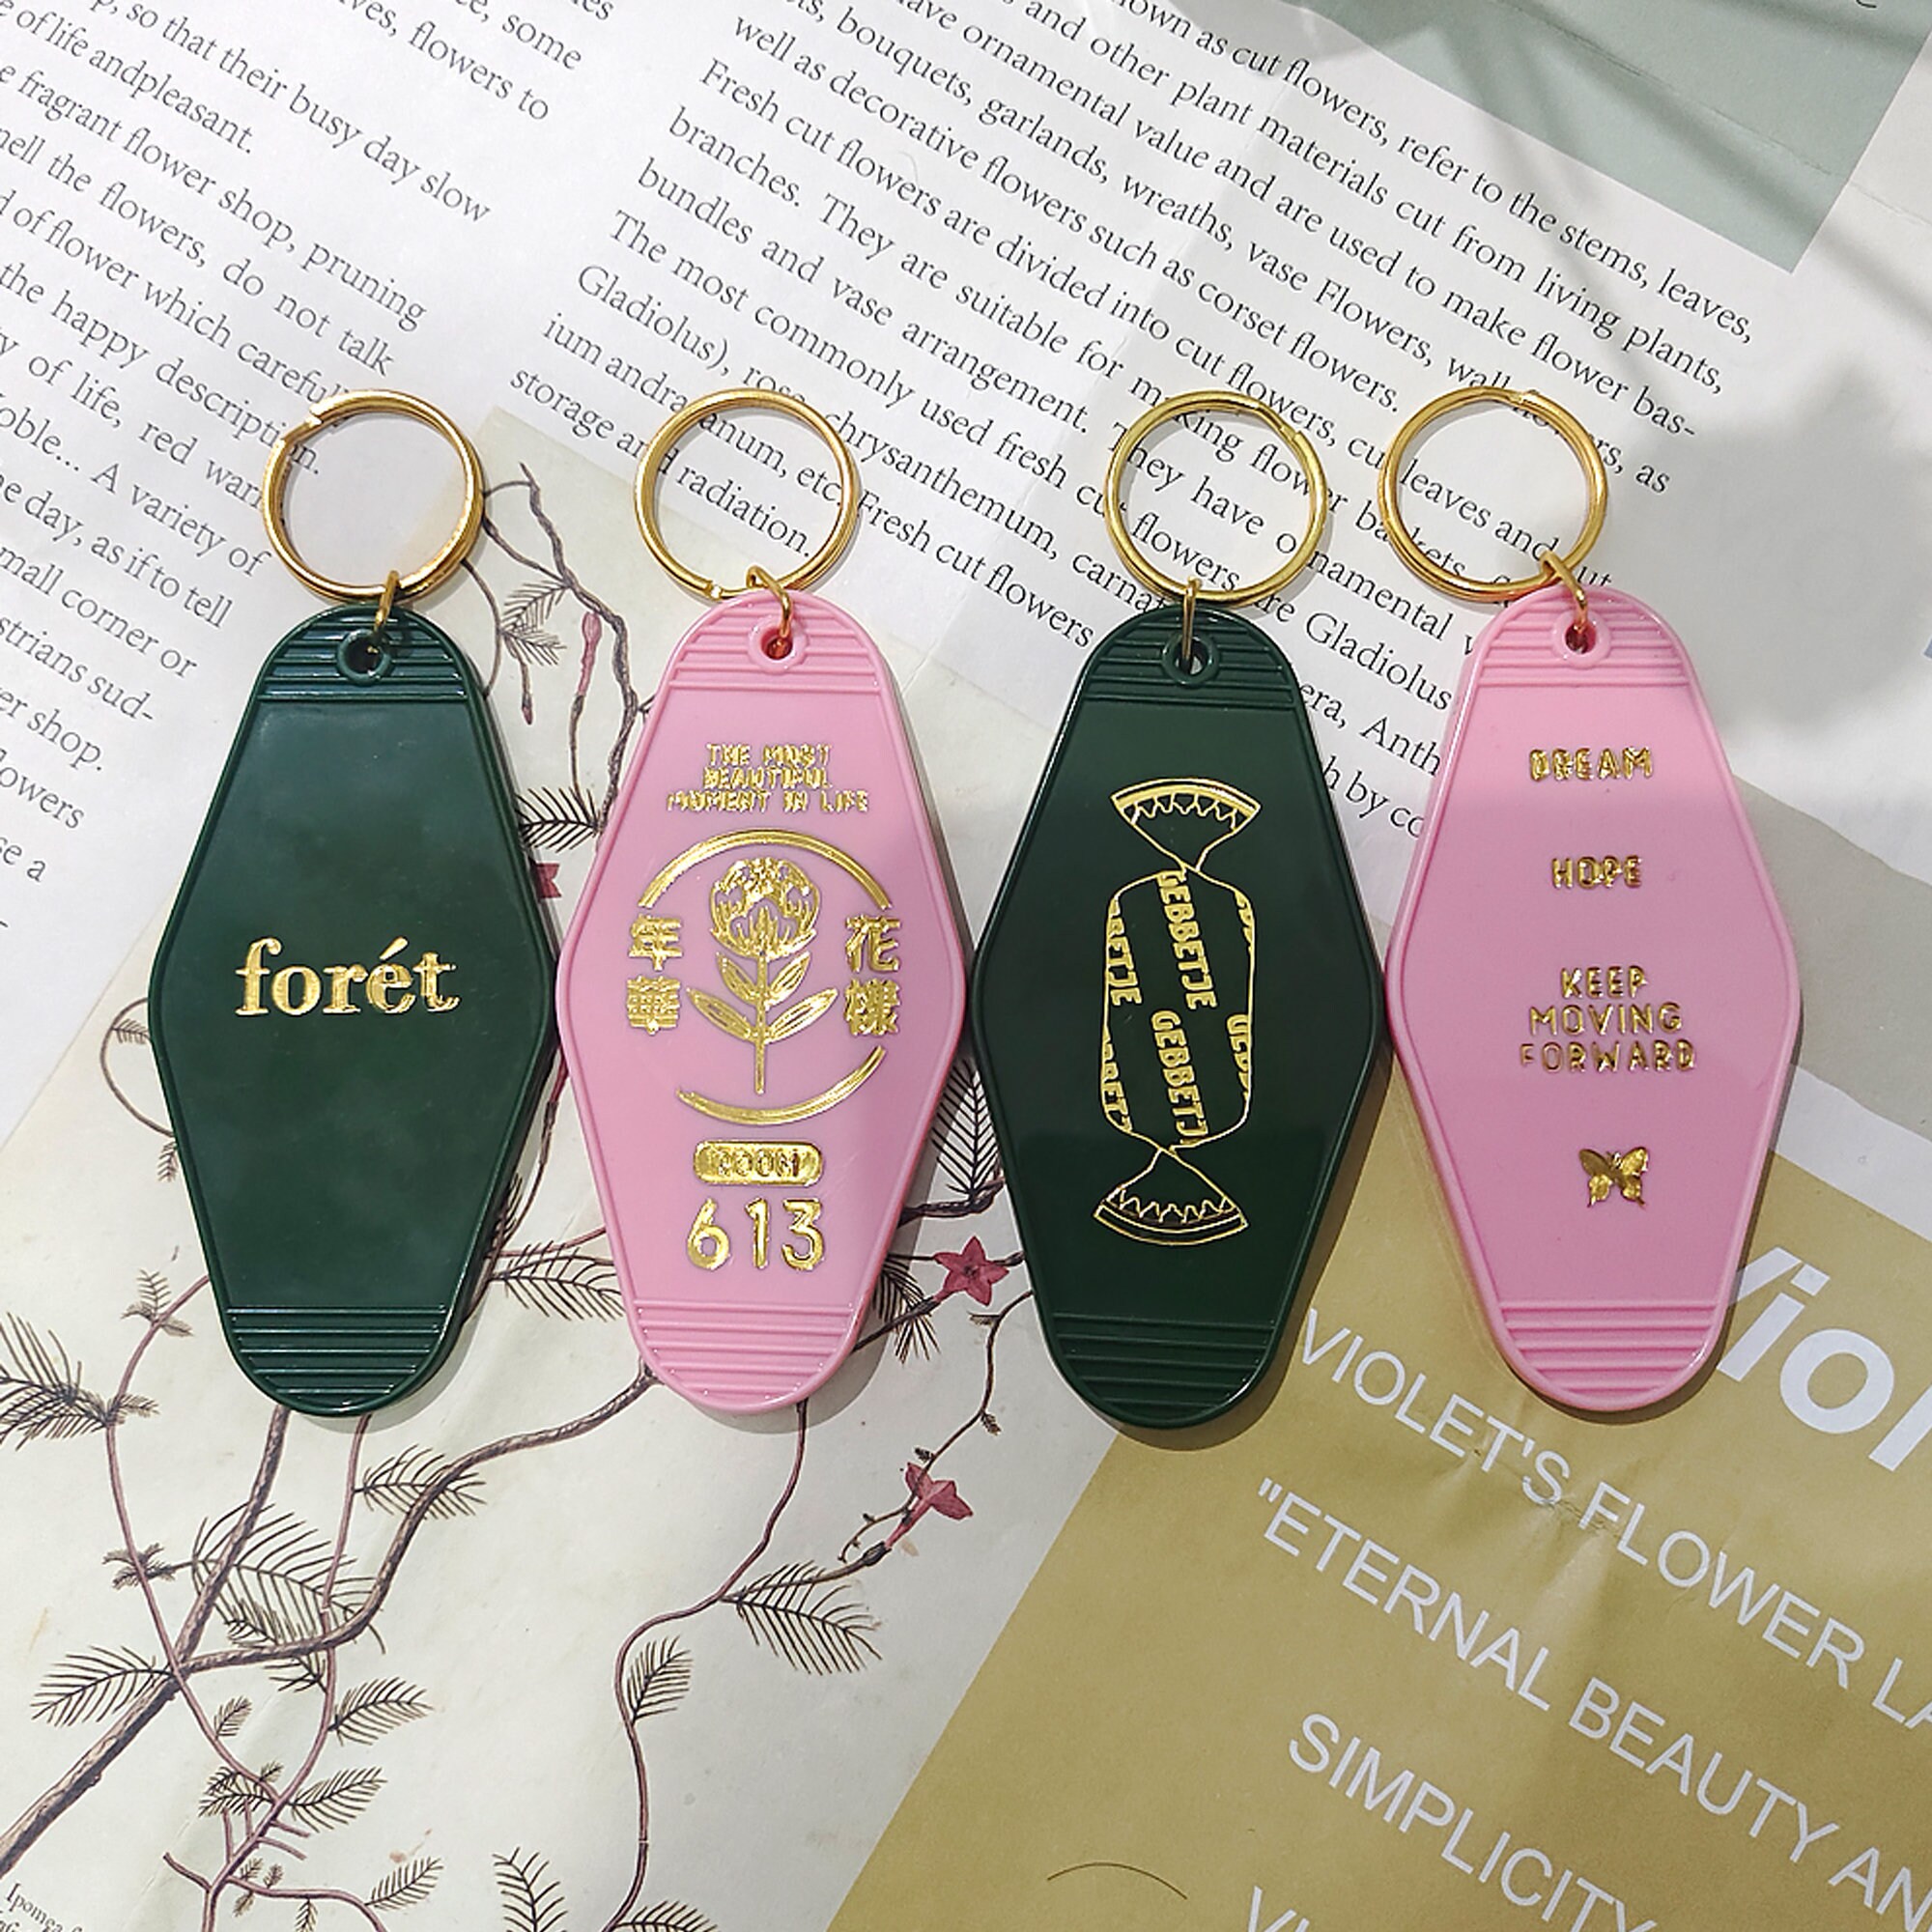 Driveuntildawn Personalized Vintage Hotel Keychain // Gold Key Ring // Personalised Key Ring // Antique Hotel Key Fob